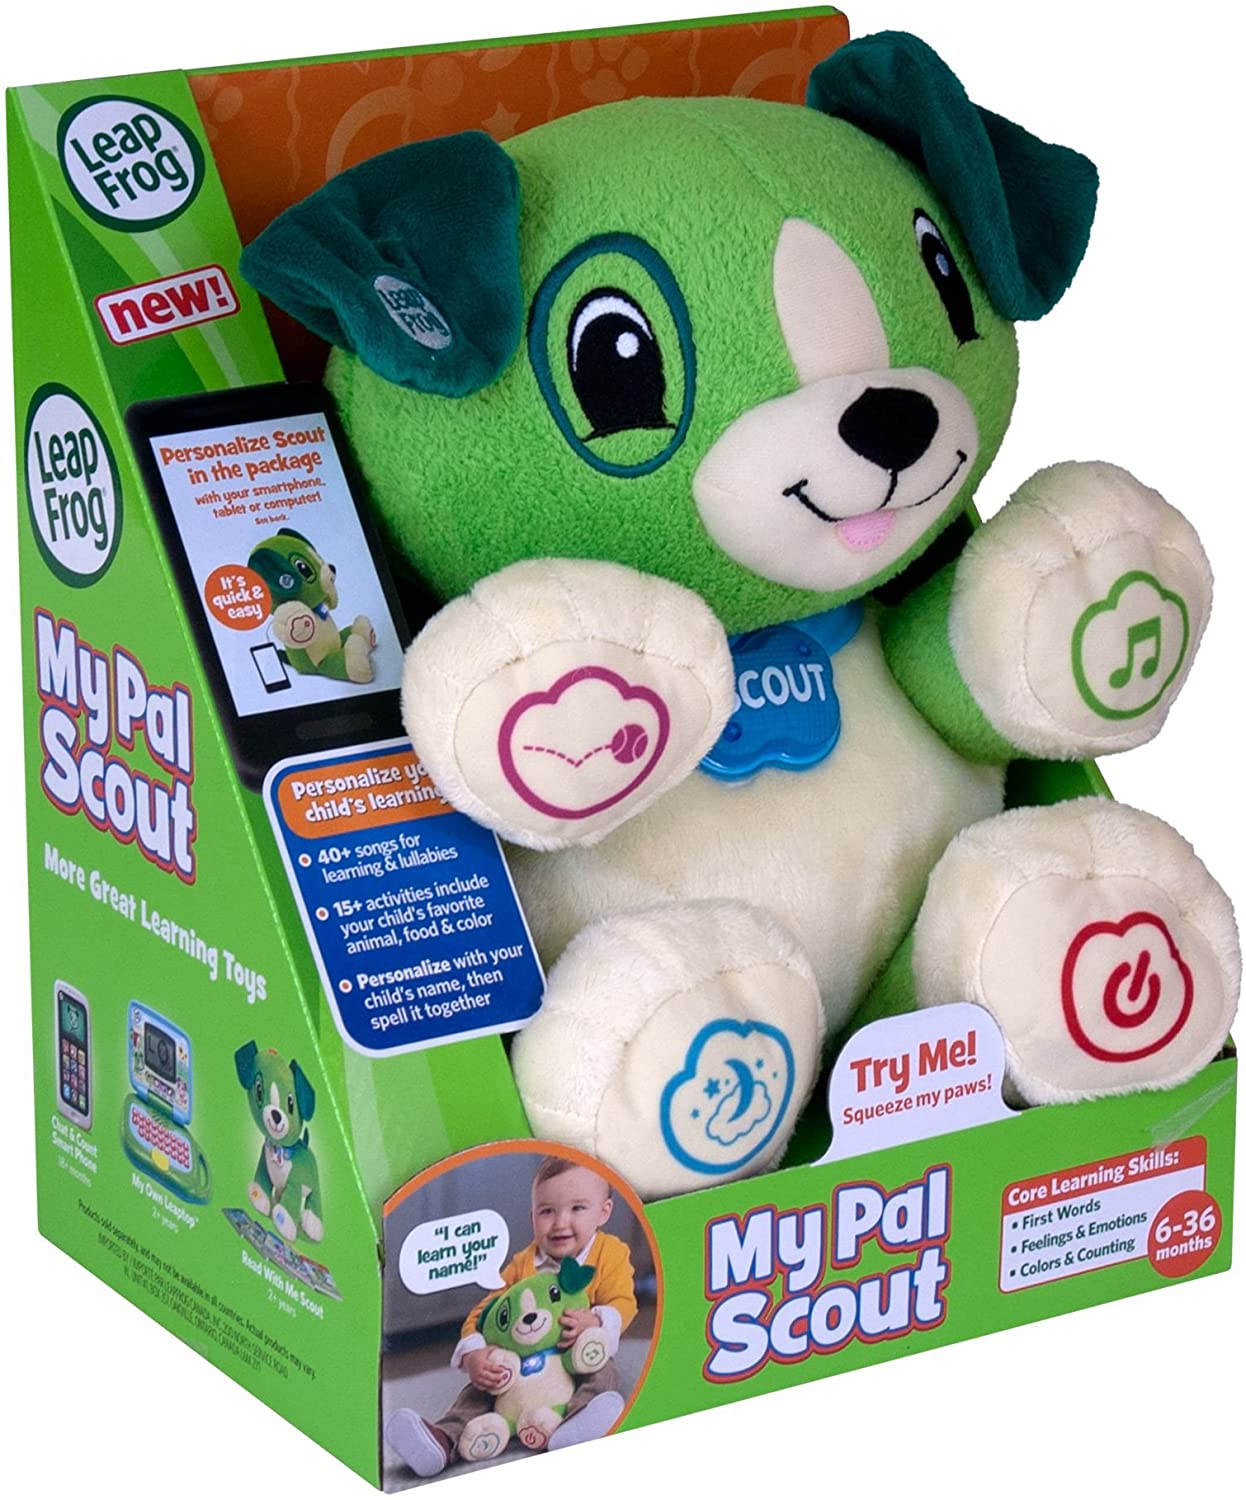 LeapFrog My Pal Scout - Recommended For Children Ages 6-36 Months